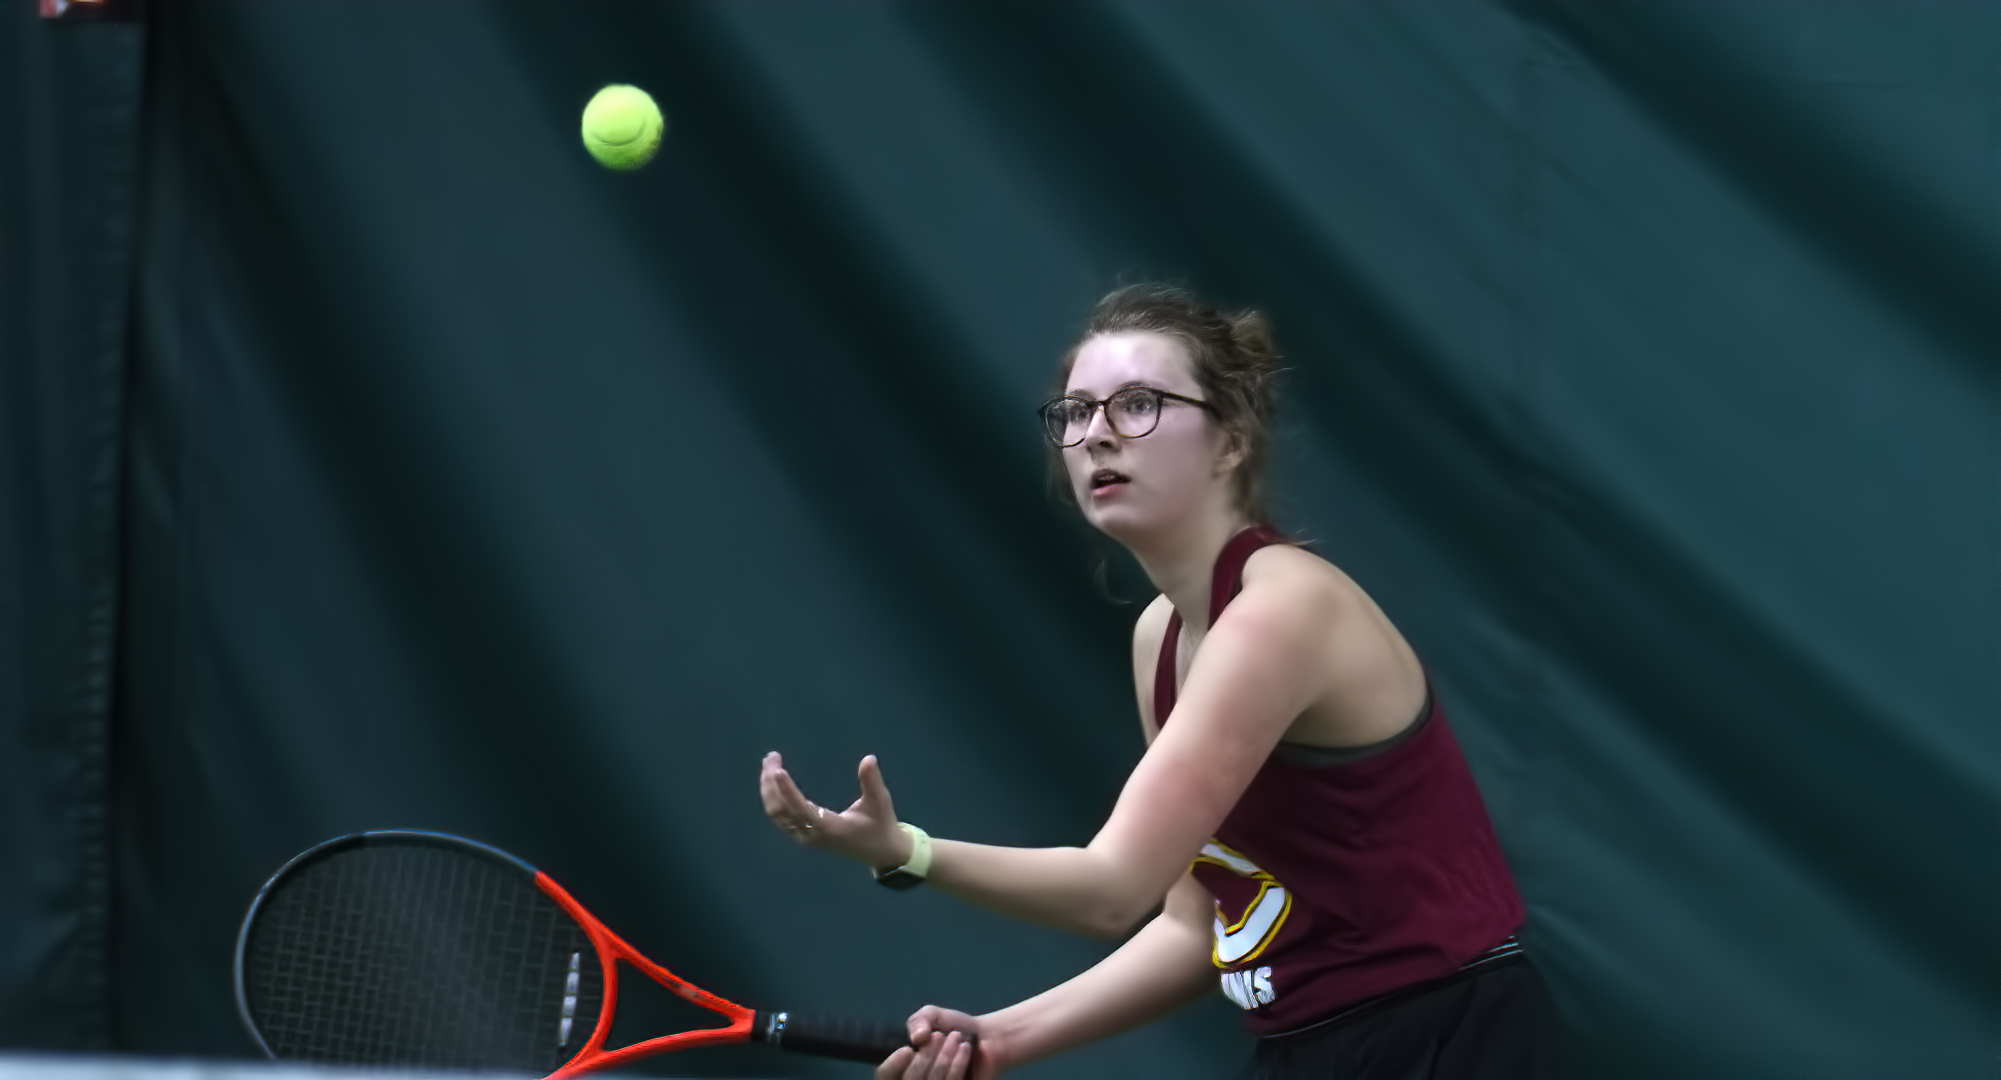 Sophomore Anna Hacker won both her doubles and singles matches to help the Cobbers record a 6-3 win over Wartburg in Florida.